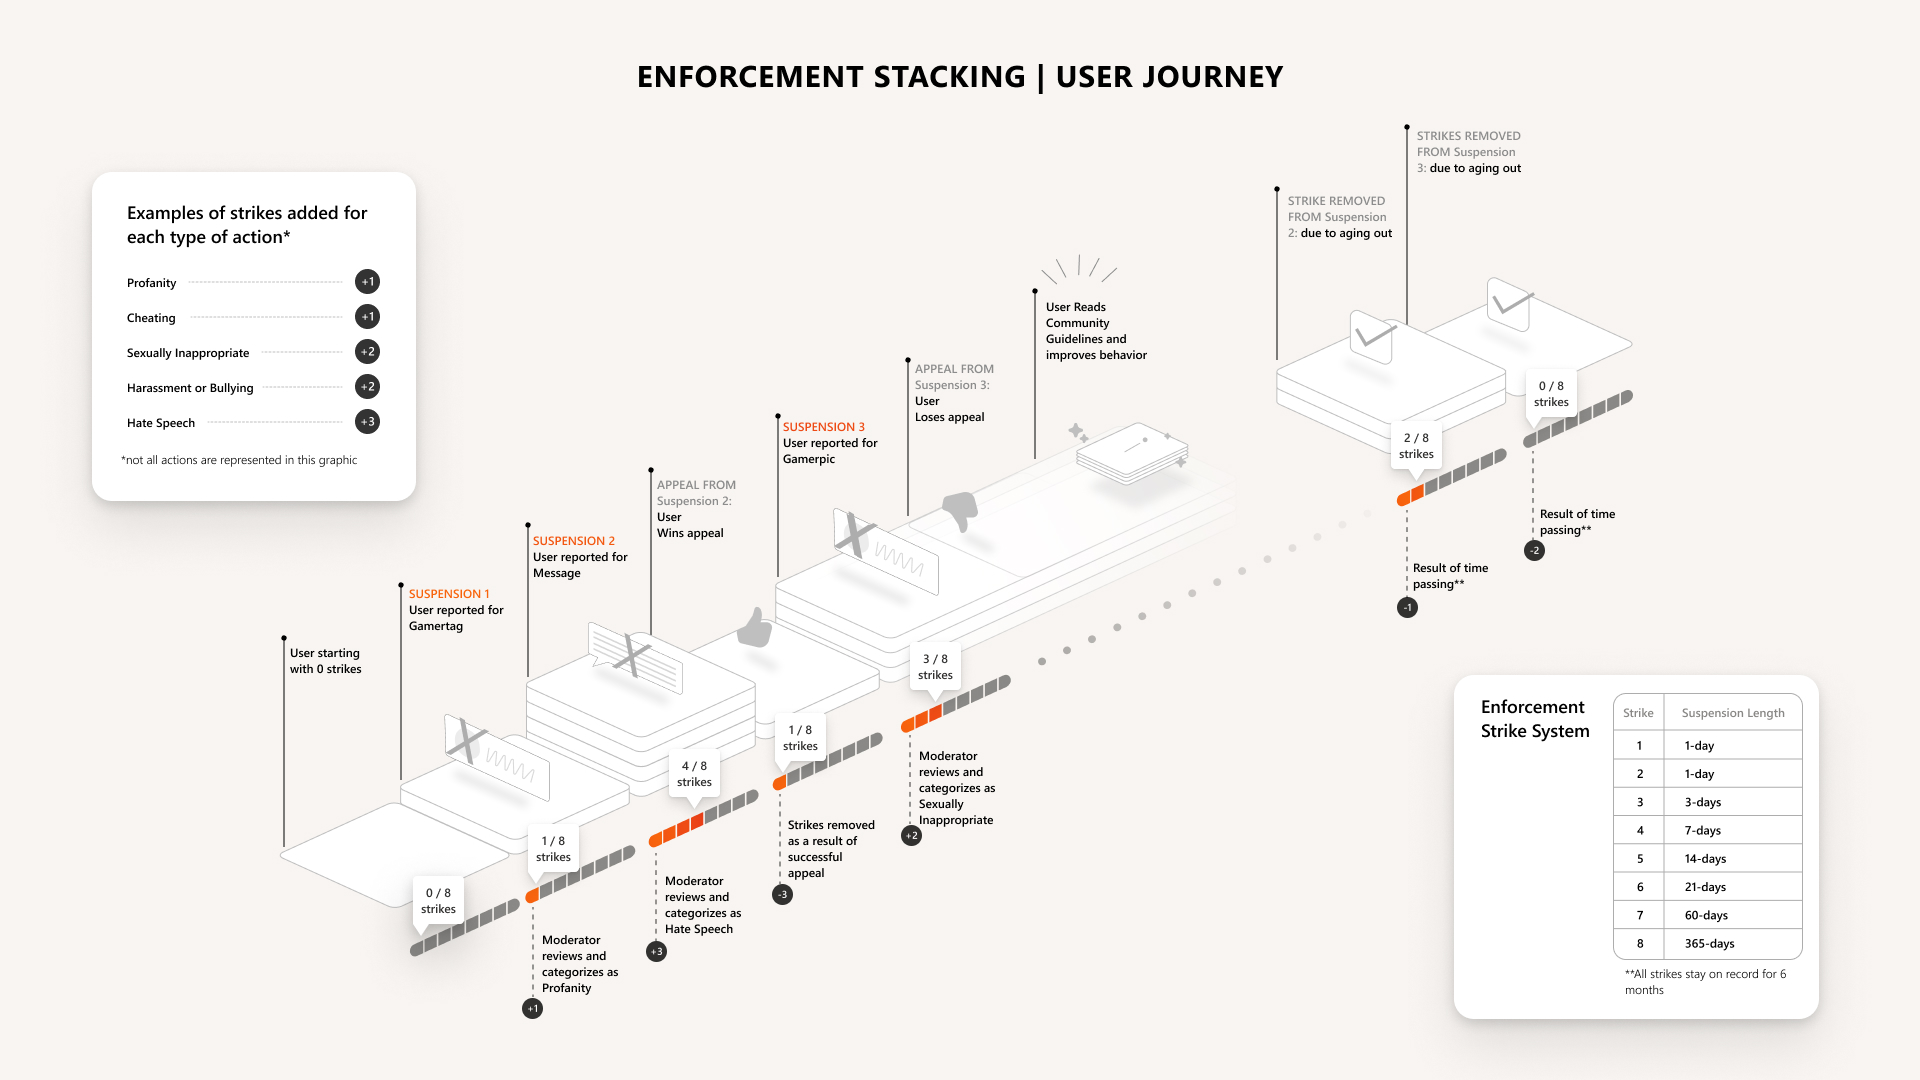 Enforcement Stacking User Journey Infographic 1920x1080 cde0f58d6138850cea87